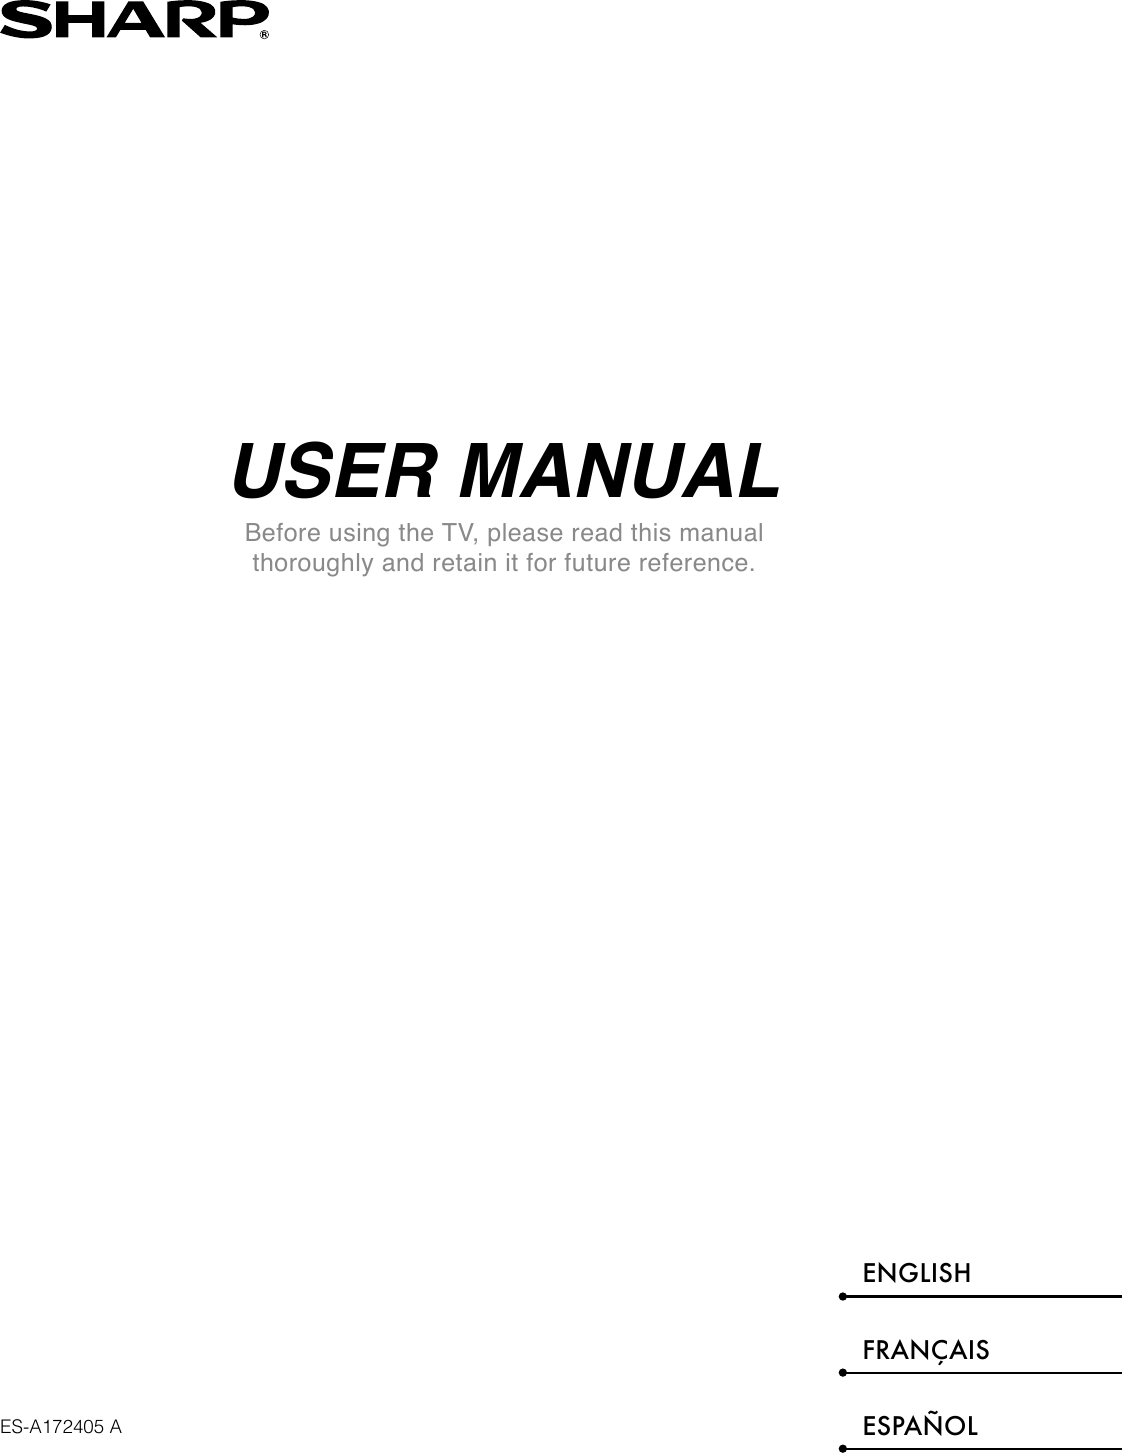 USER MANUALBefore using the TV, please read this manual thoroughly and retain it for future reference.ENGLISHFRANÇAISESPAÑOLES-A172405 A